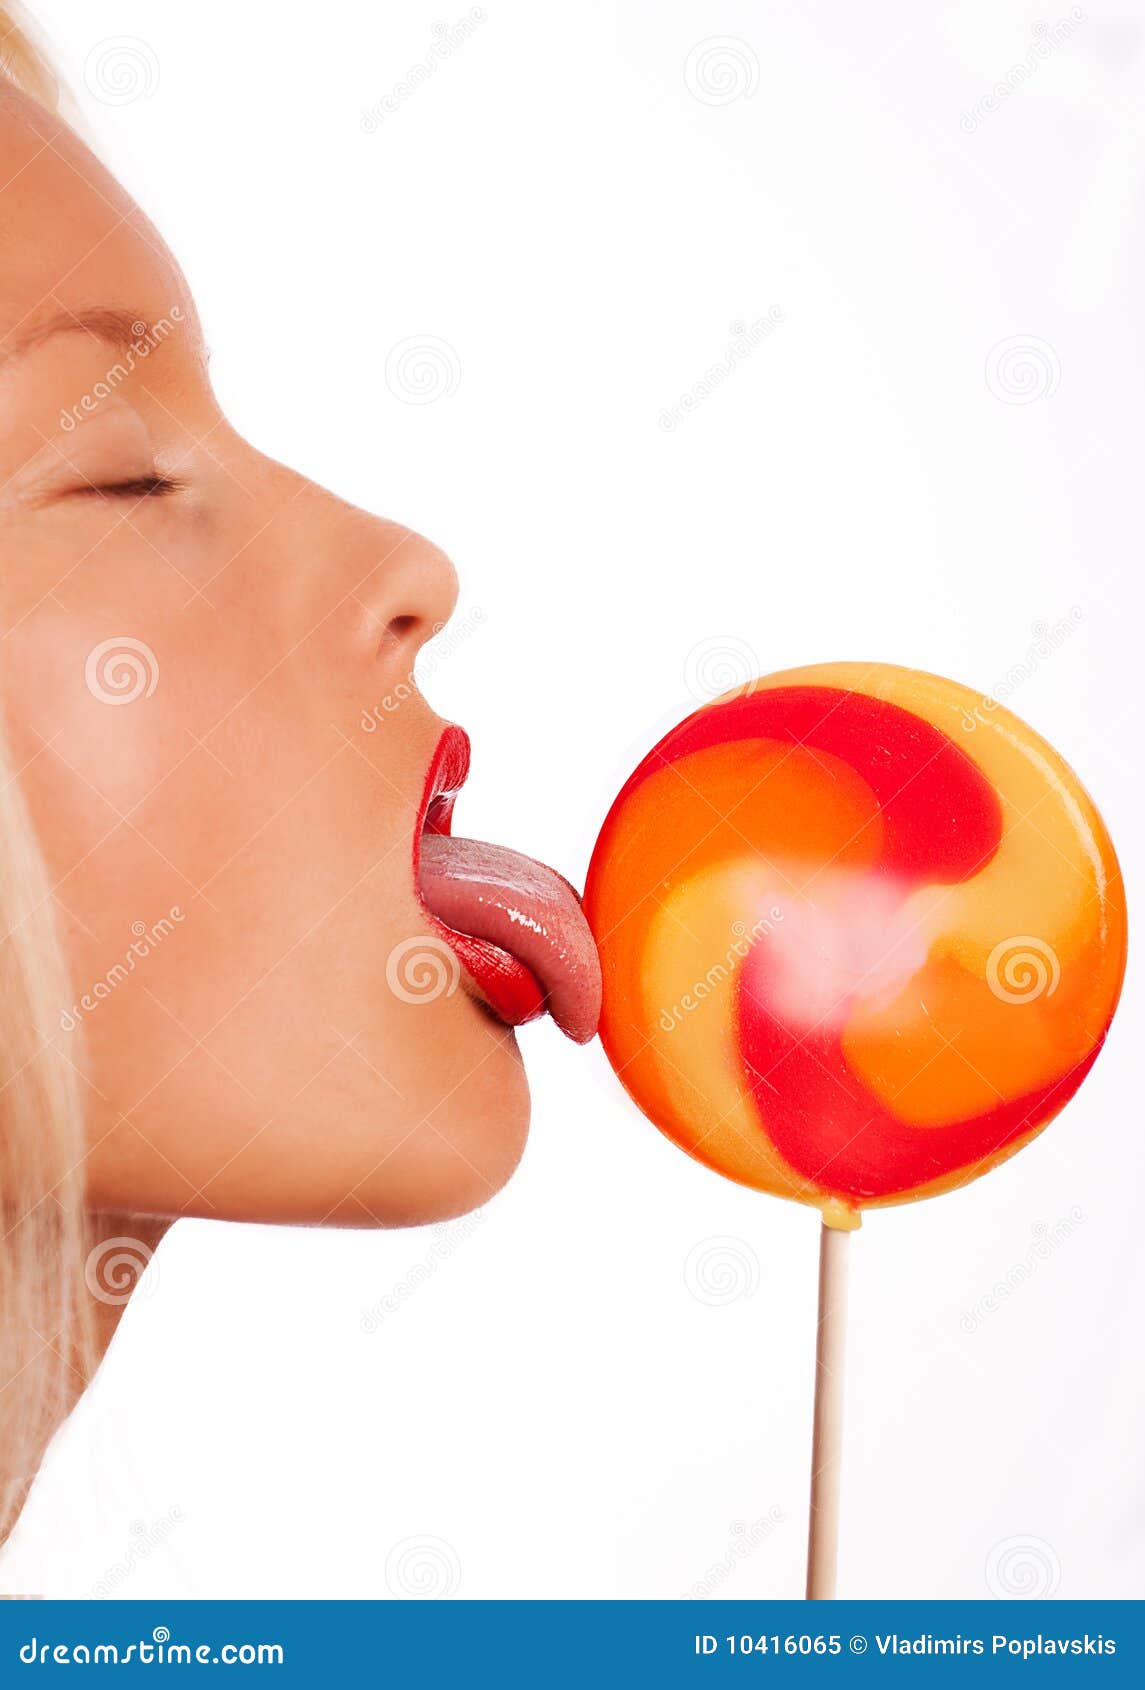 How To Lick A Woman